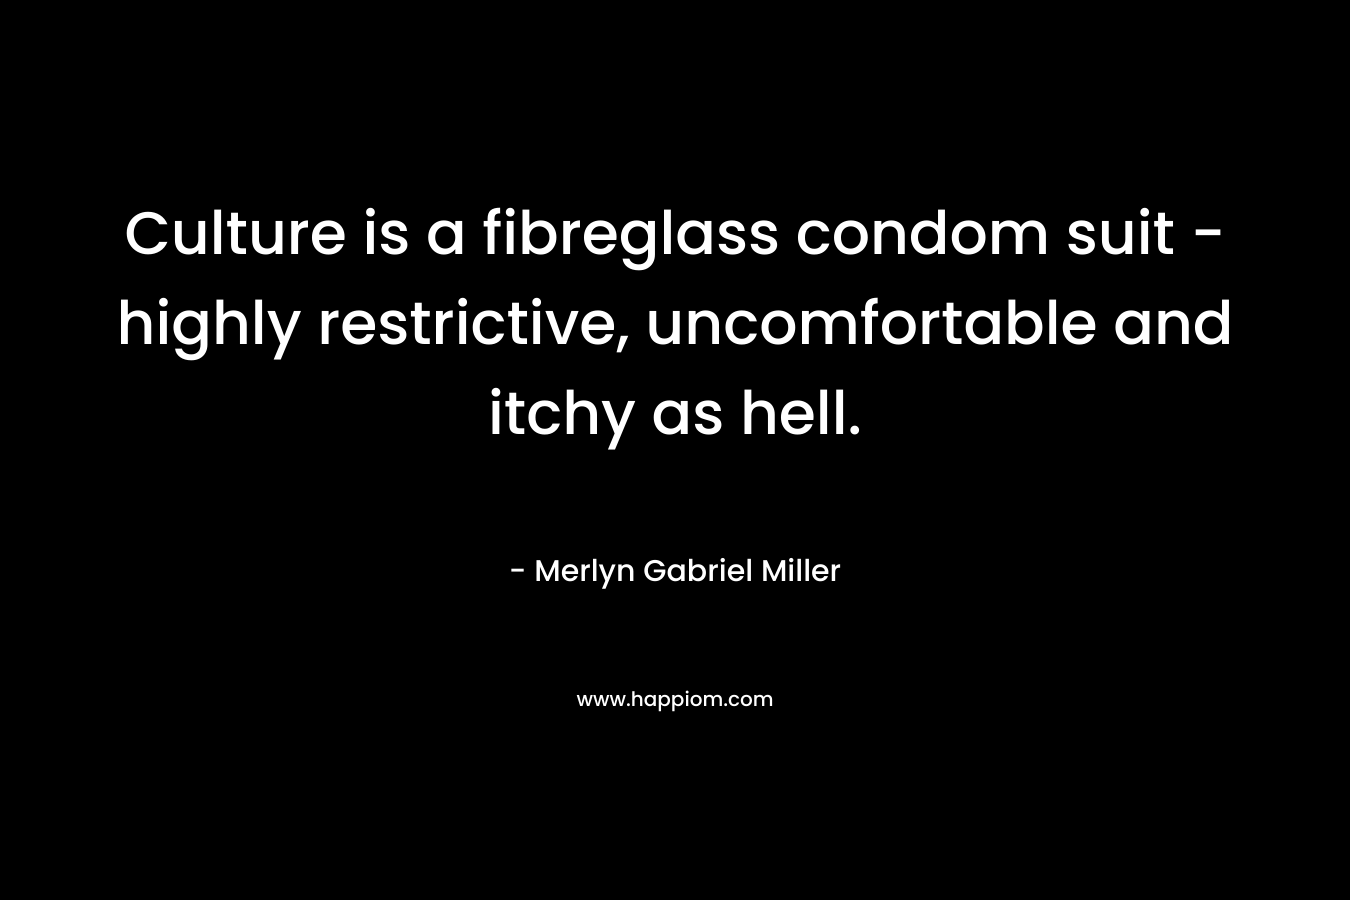 Culture is a fibreglass condom suit - highly restrictive, uncomfortable and itchy as hell.